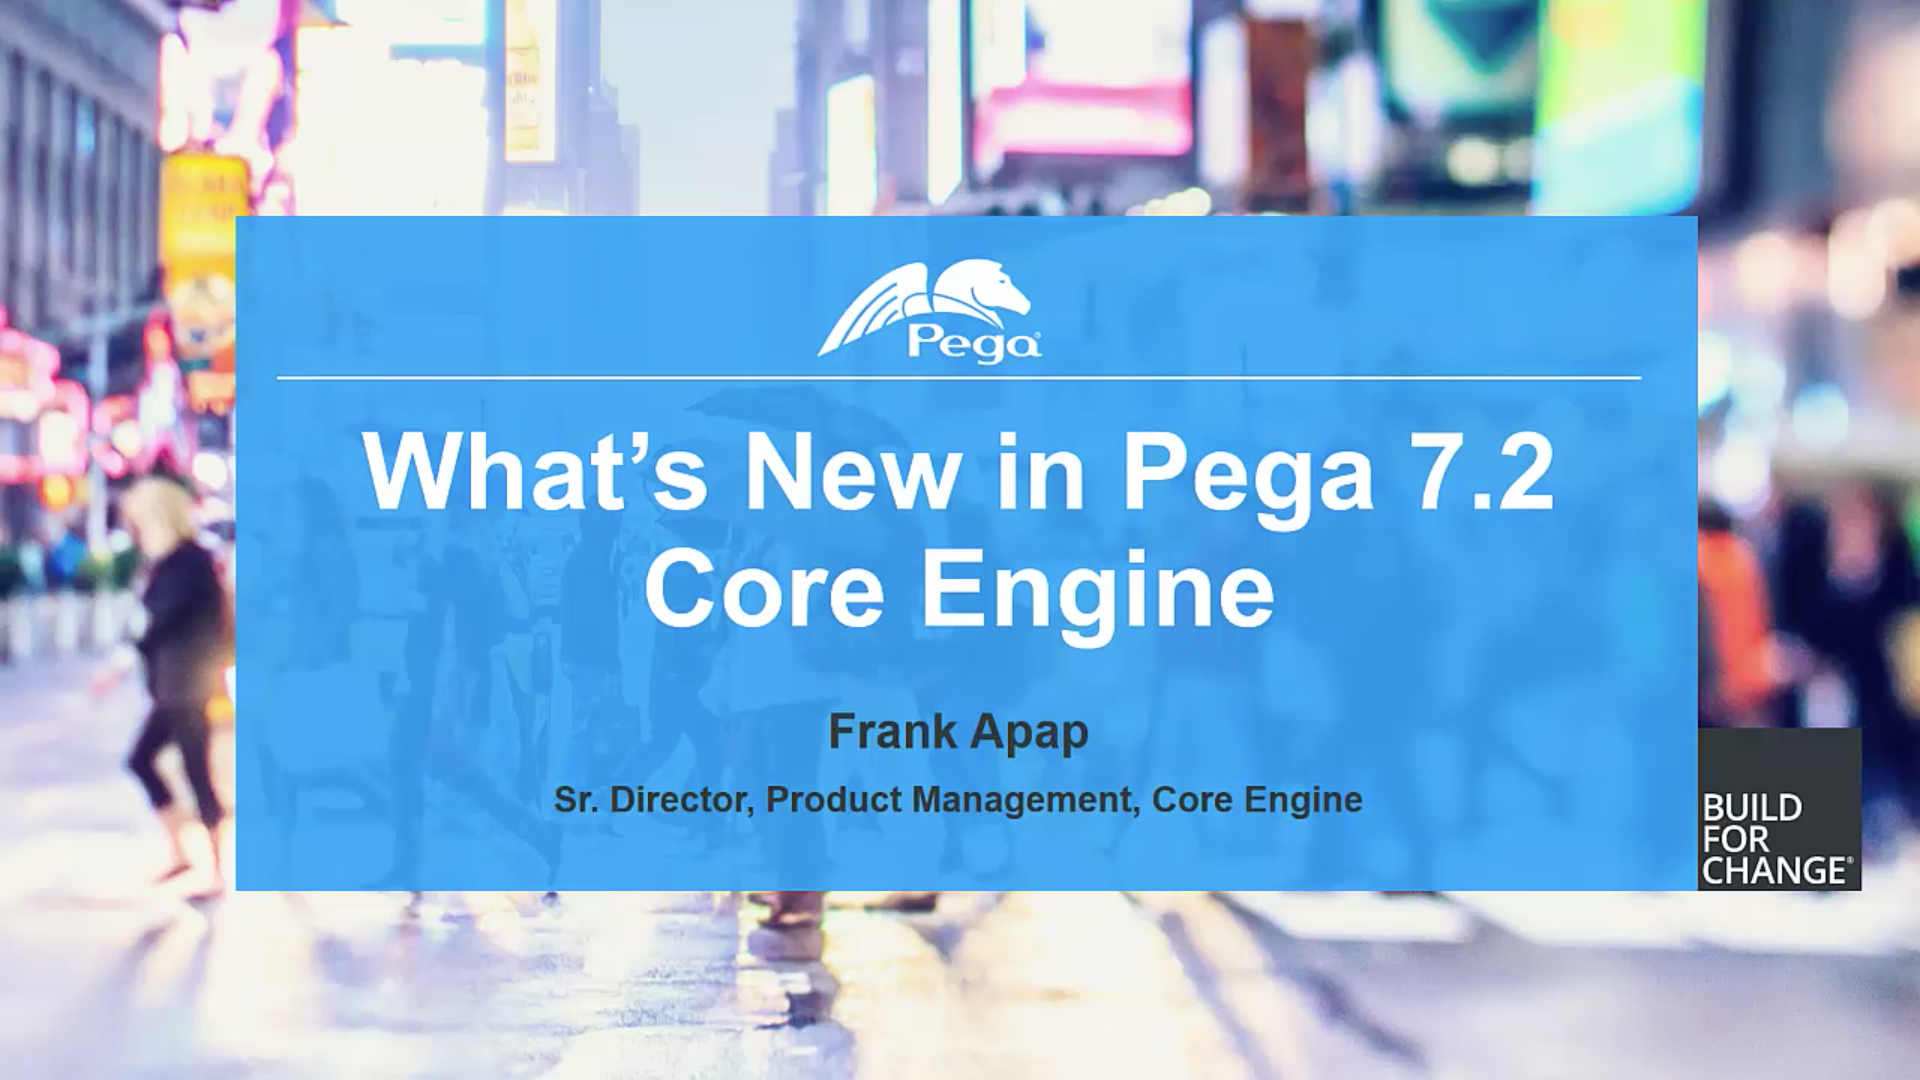 Pega 7.2 Update: What's New in Core Engine